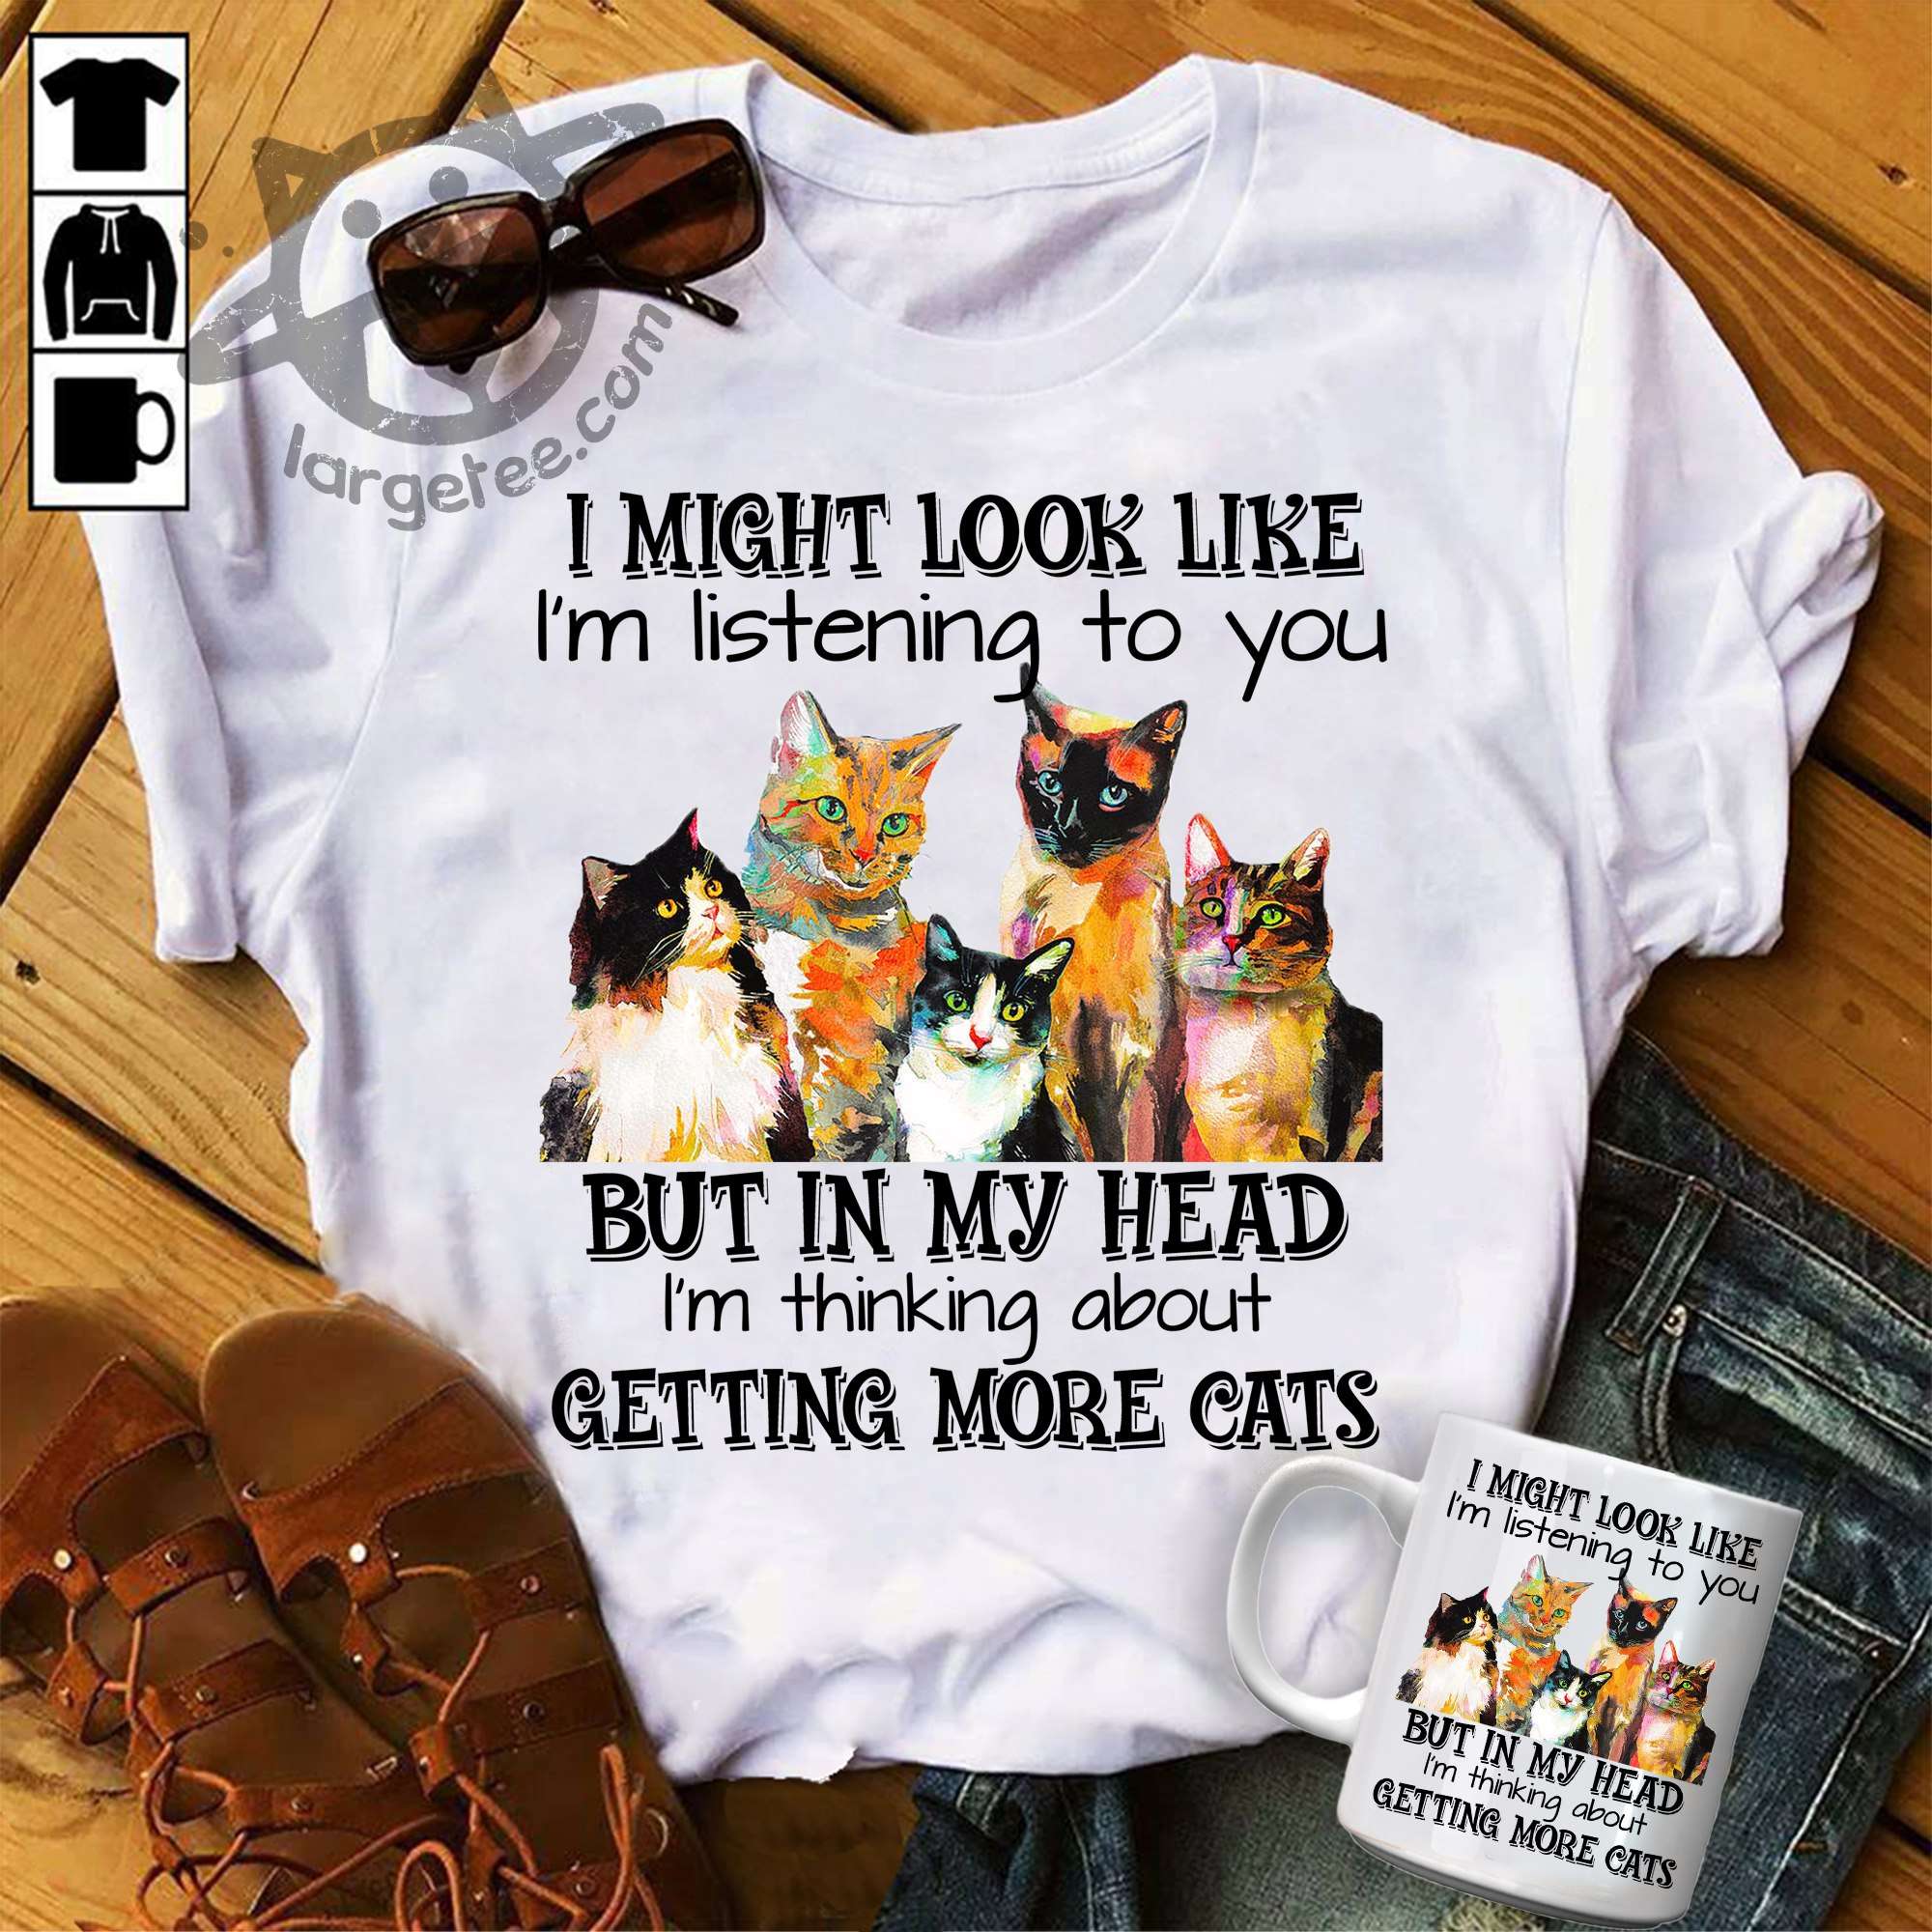 I might look like I'm listening to you but in my head I'm thinking about getting more cats